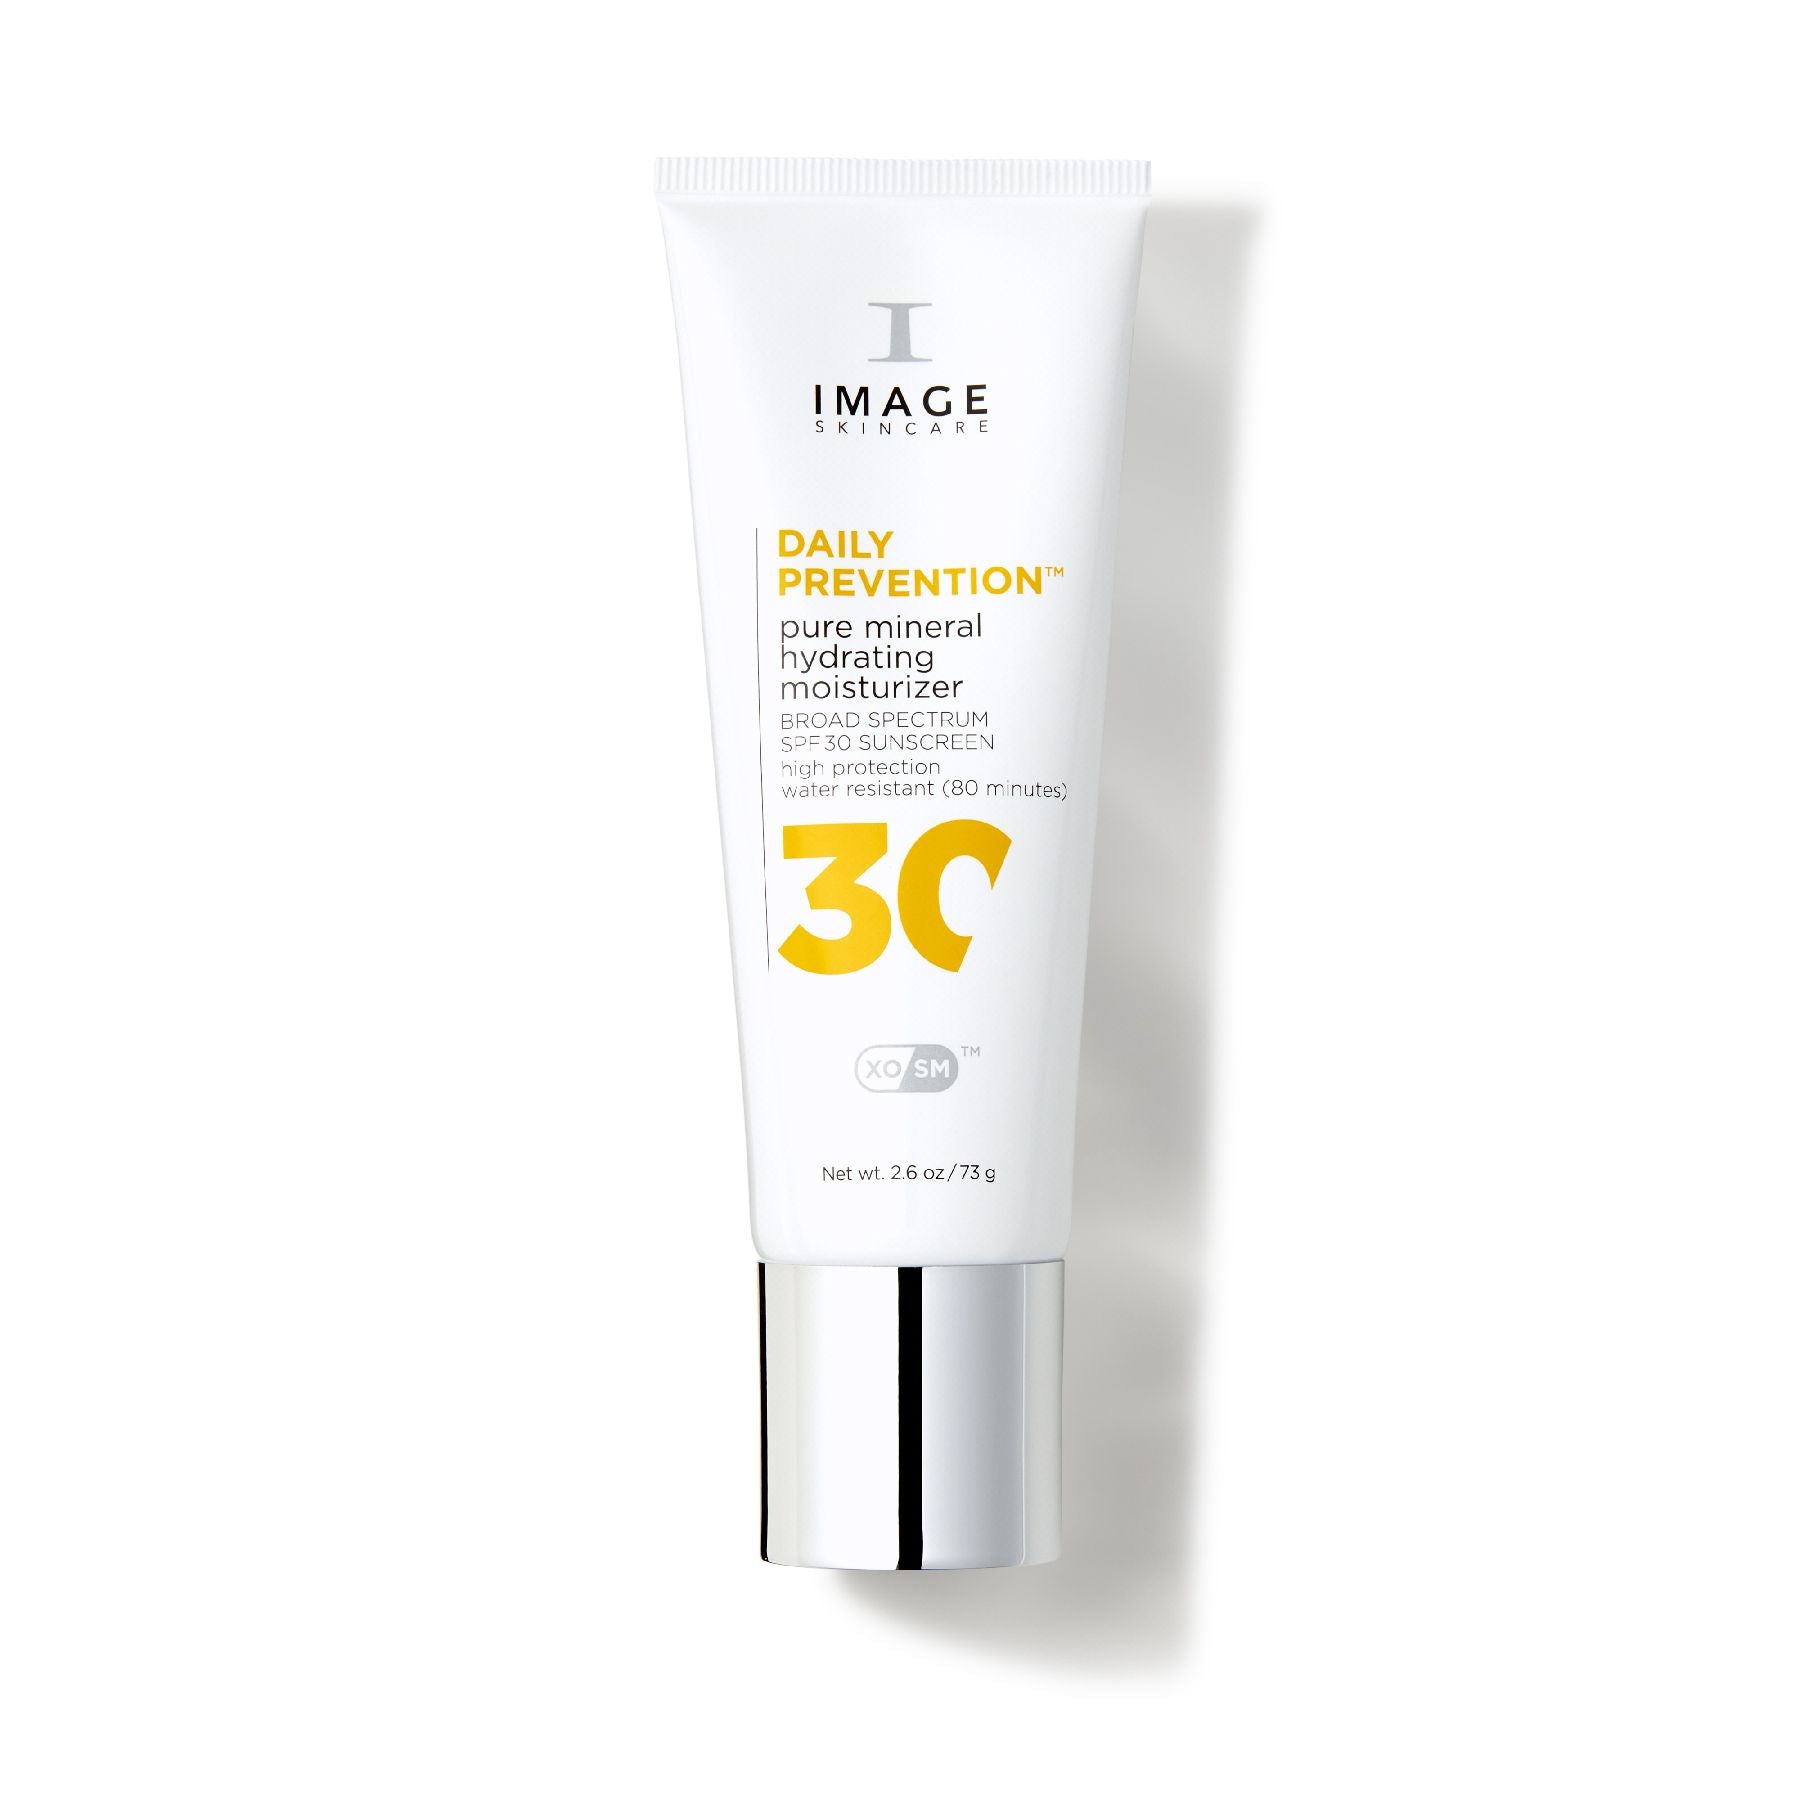 IMAGE Skincare Daily Prevention Pure Mineral Hydrating Moisturizer